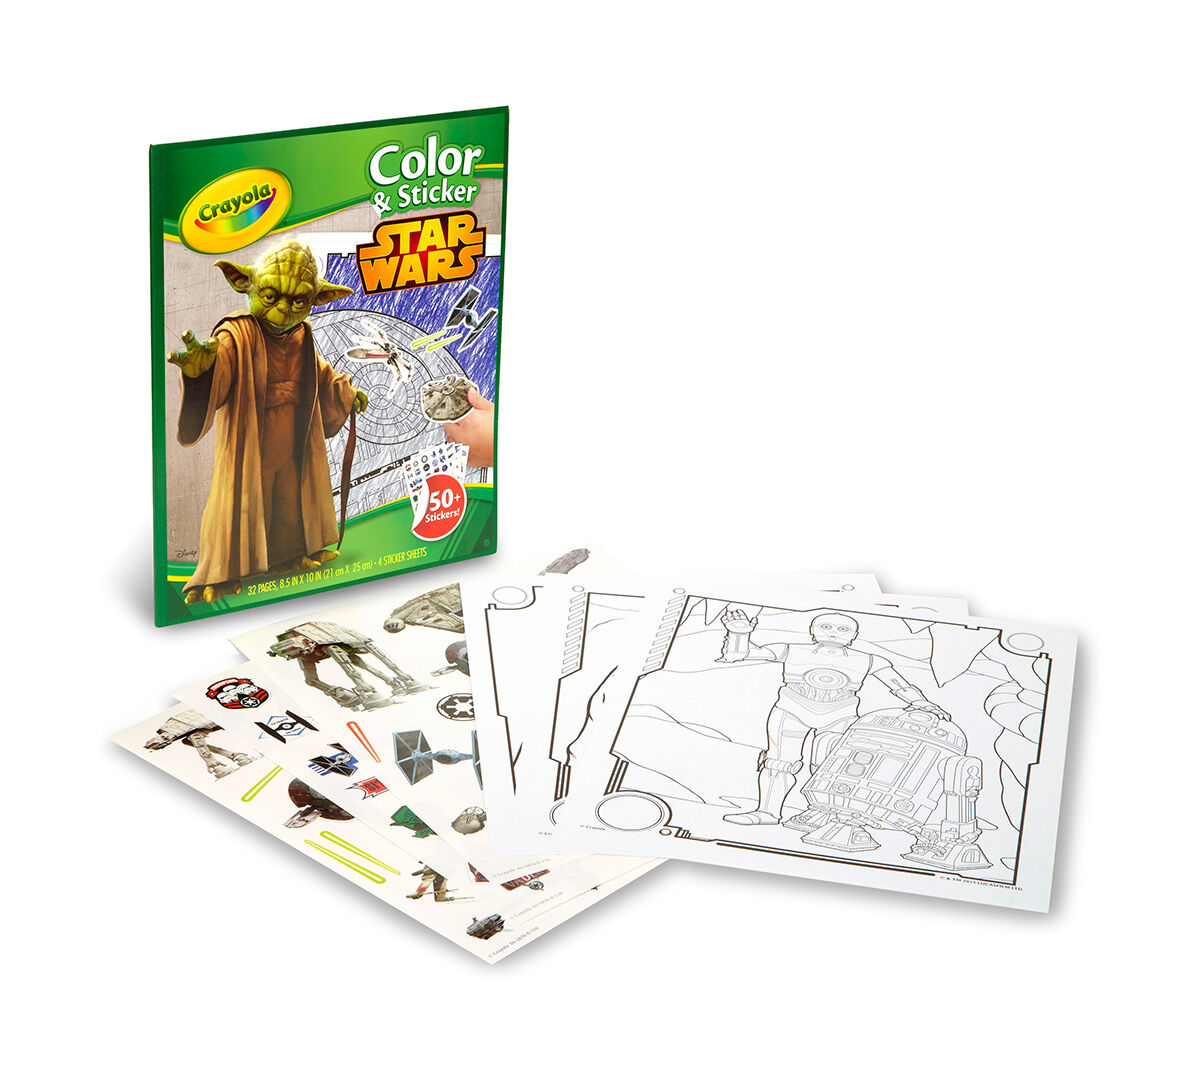 IDEAL PARTY BAG GIFT 50 STICKERS CRAYOLA STAR WARS COLOUR & STICKER BOOK 